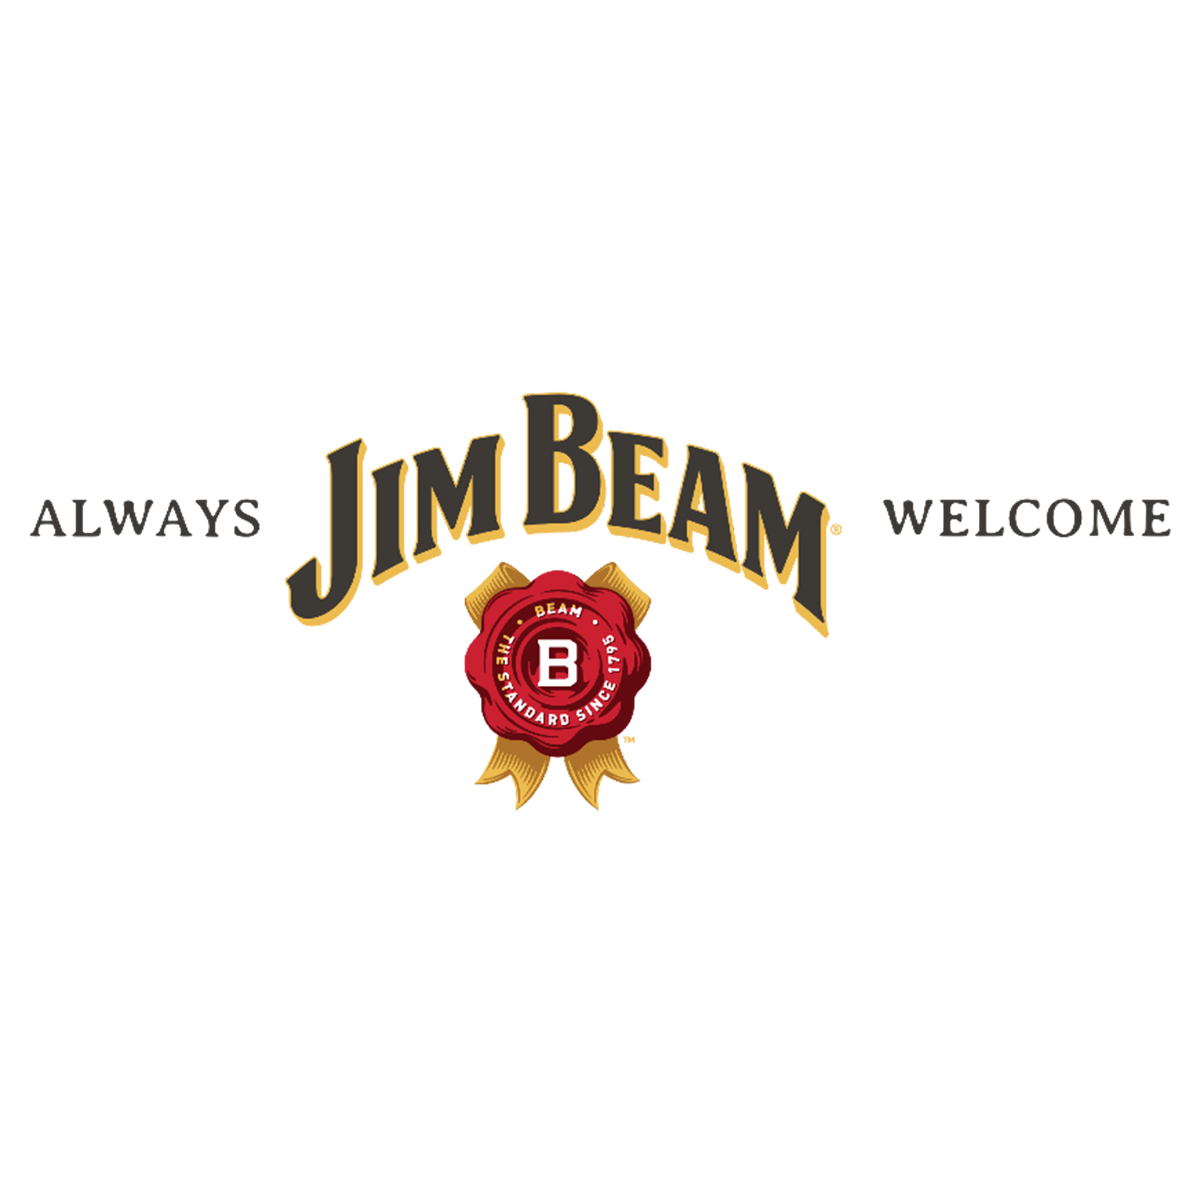 Canadian Music Week Announces Nominations are Open for the 21st Annual Jim Beam® INDIE Awards